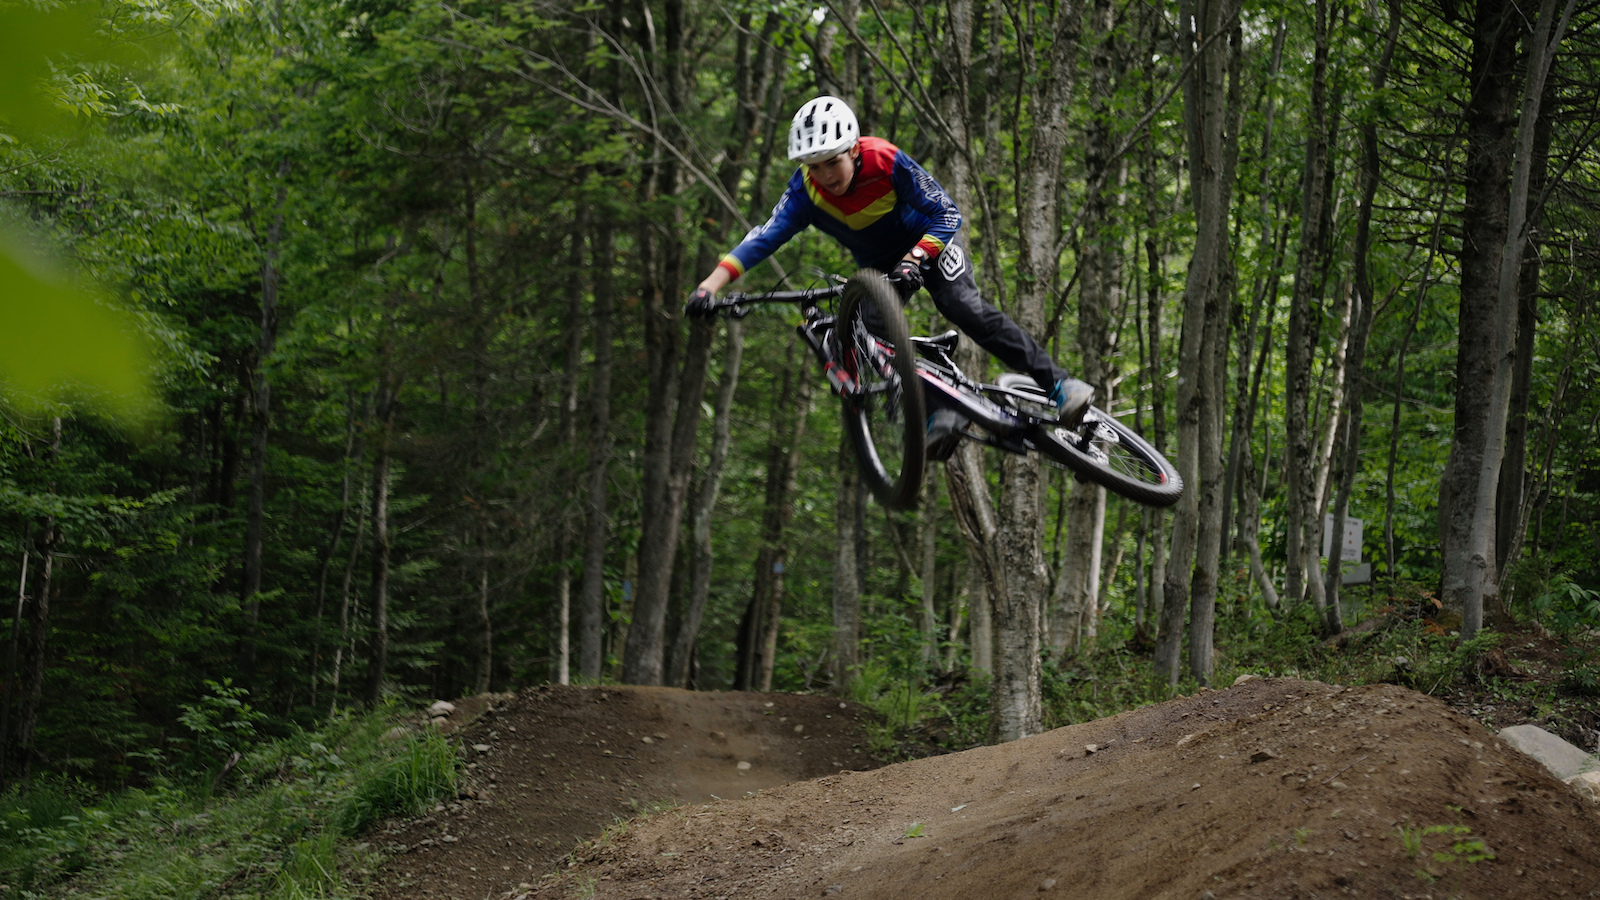 Benjamin Giguère, 13 years old from Ste-Marie near Quebec City. Freestyle skier & mountain biker for the past 10 years. Just added dirt jumping to the mix and spending hours on the trampoline to perfect his style.